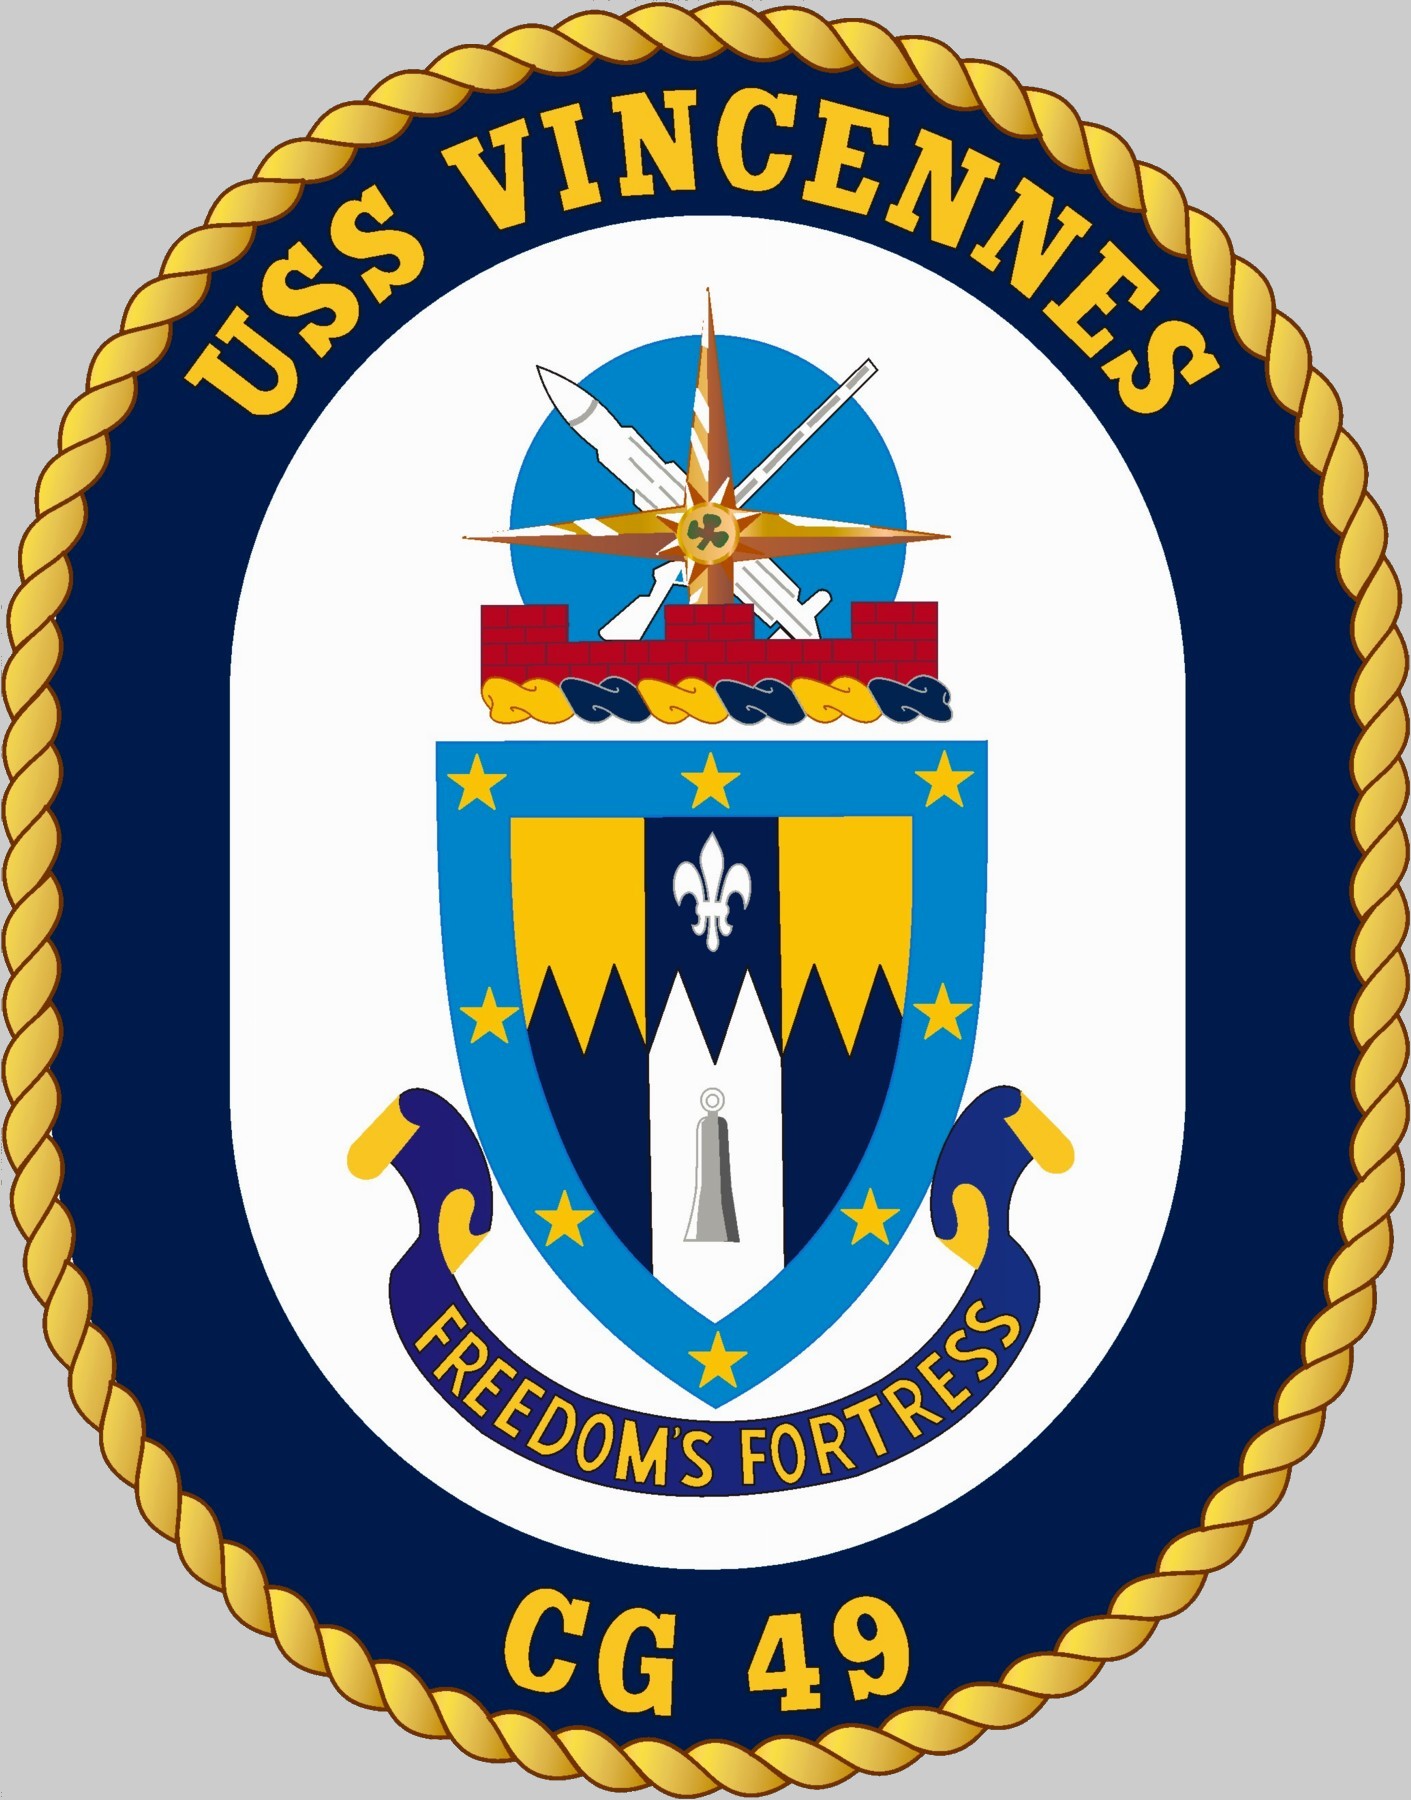 cg-49 uss vincennes insignia crest patch badge ticonderoga class guided missile cruiser aegis us navy 02x